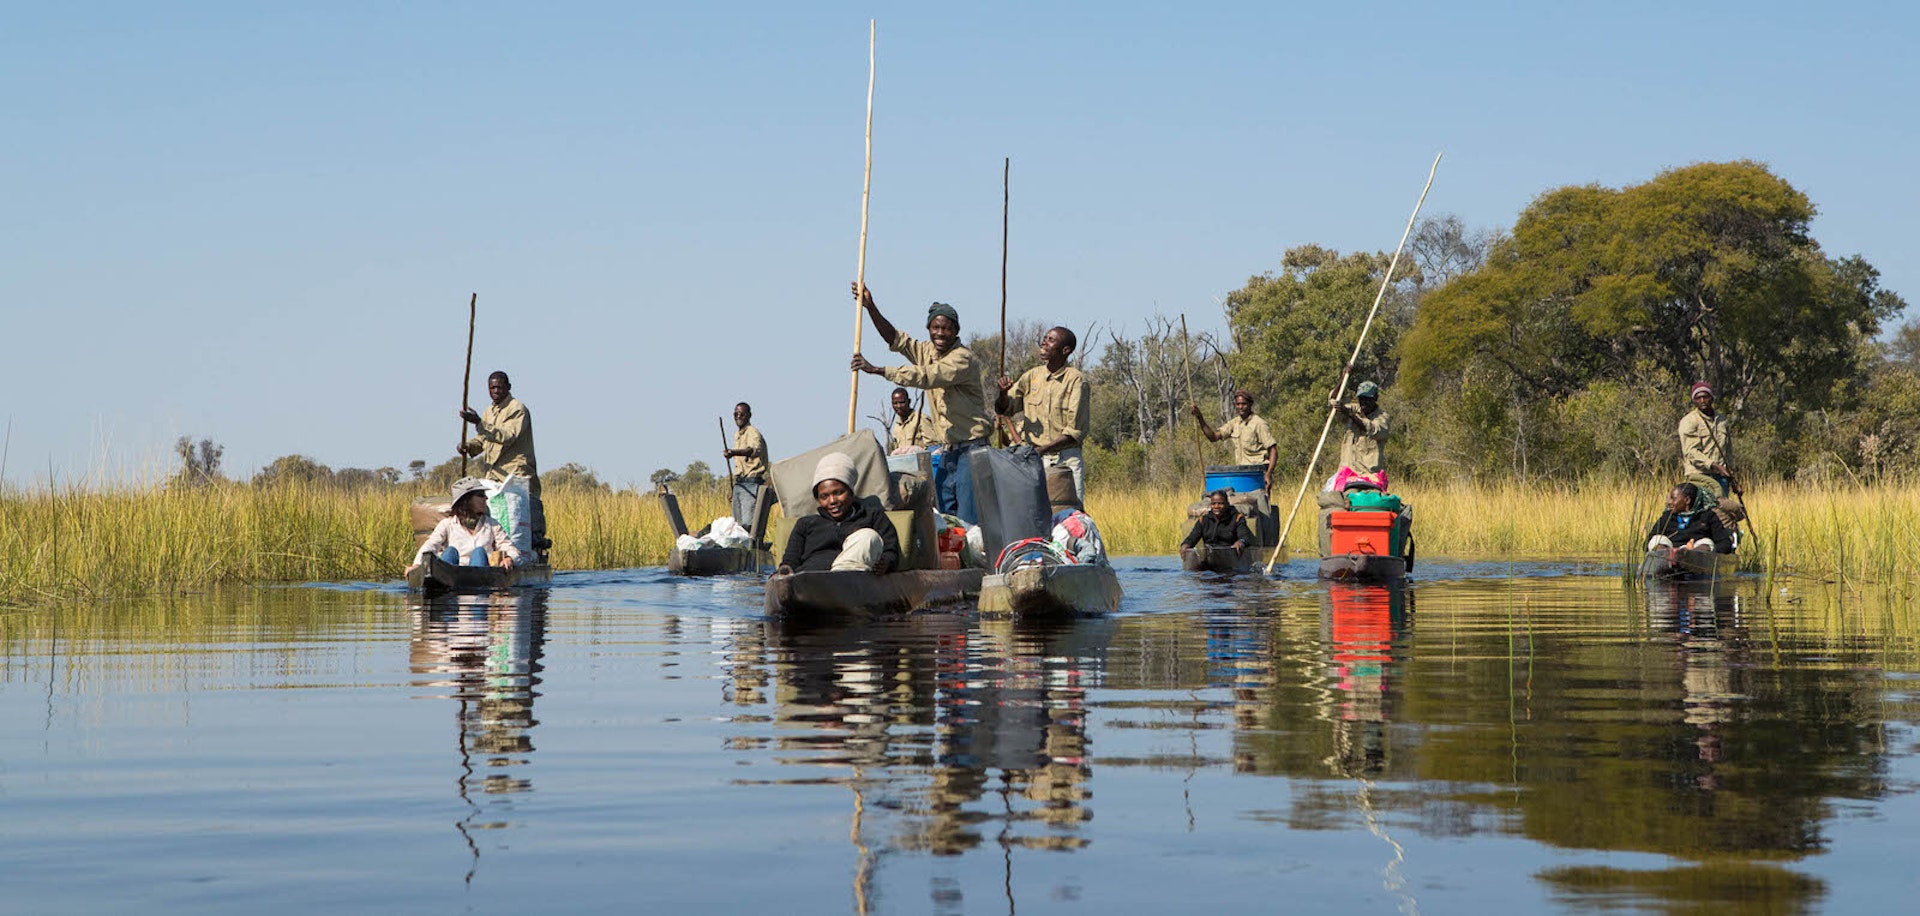 Half a dozen mokoro (traditional dugout canoes) move through the Okavango Delta by pole - each is laden with mobile safari camp supplies and a couple of camp staff © James Gifford / Lonely Planet